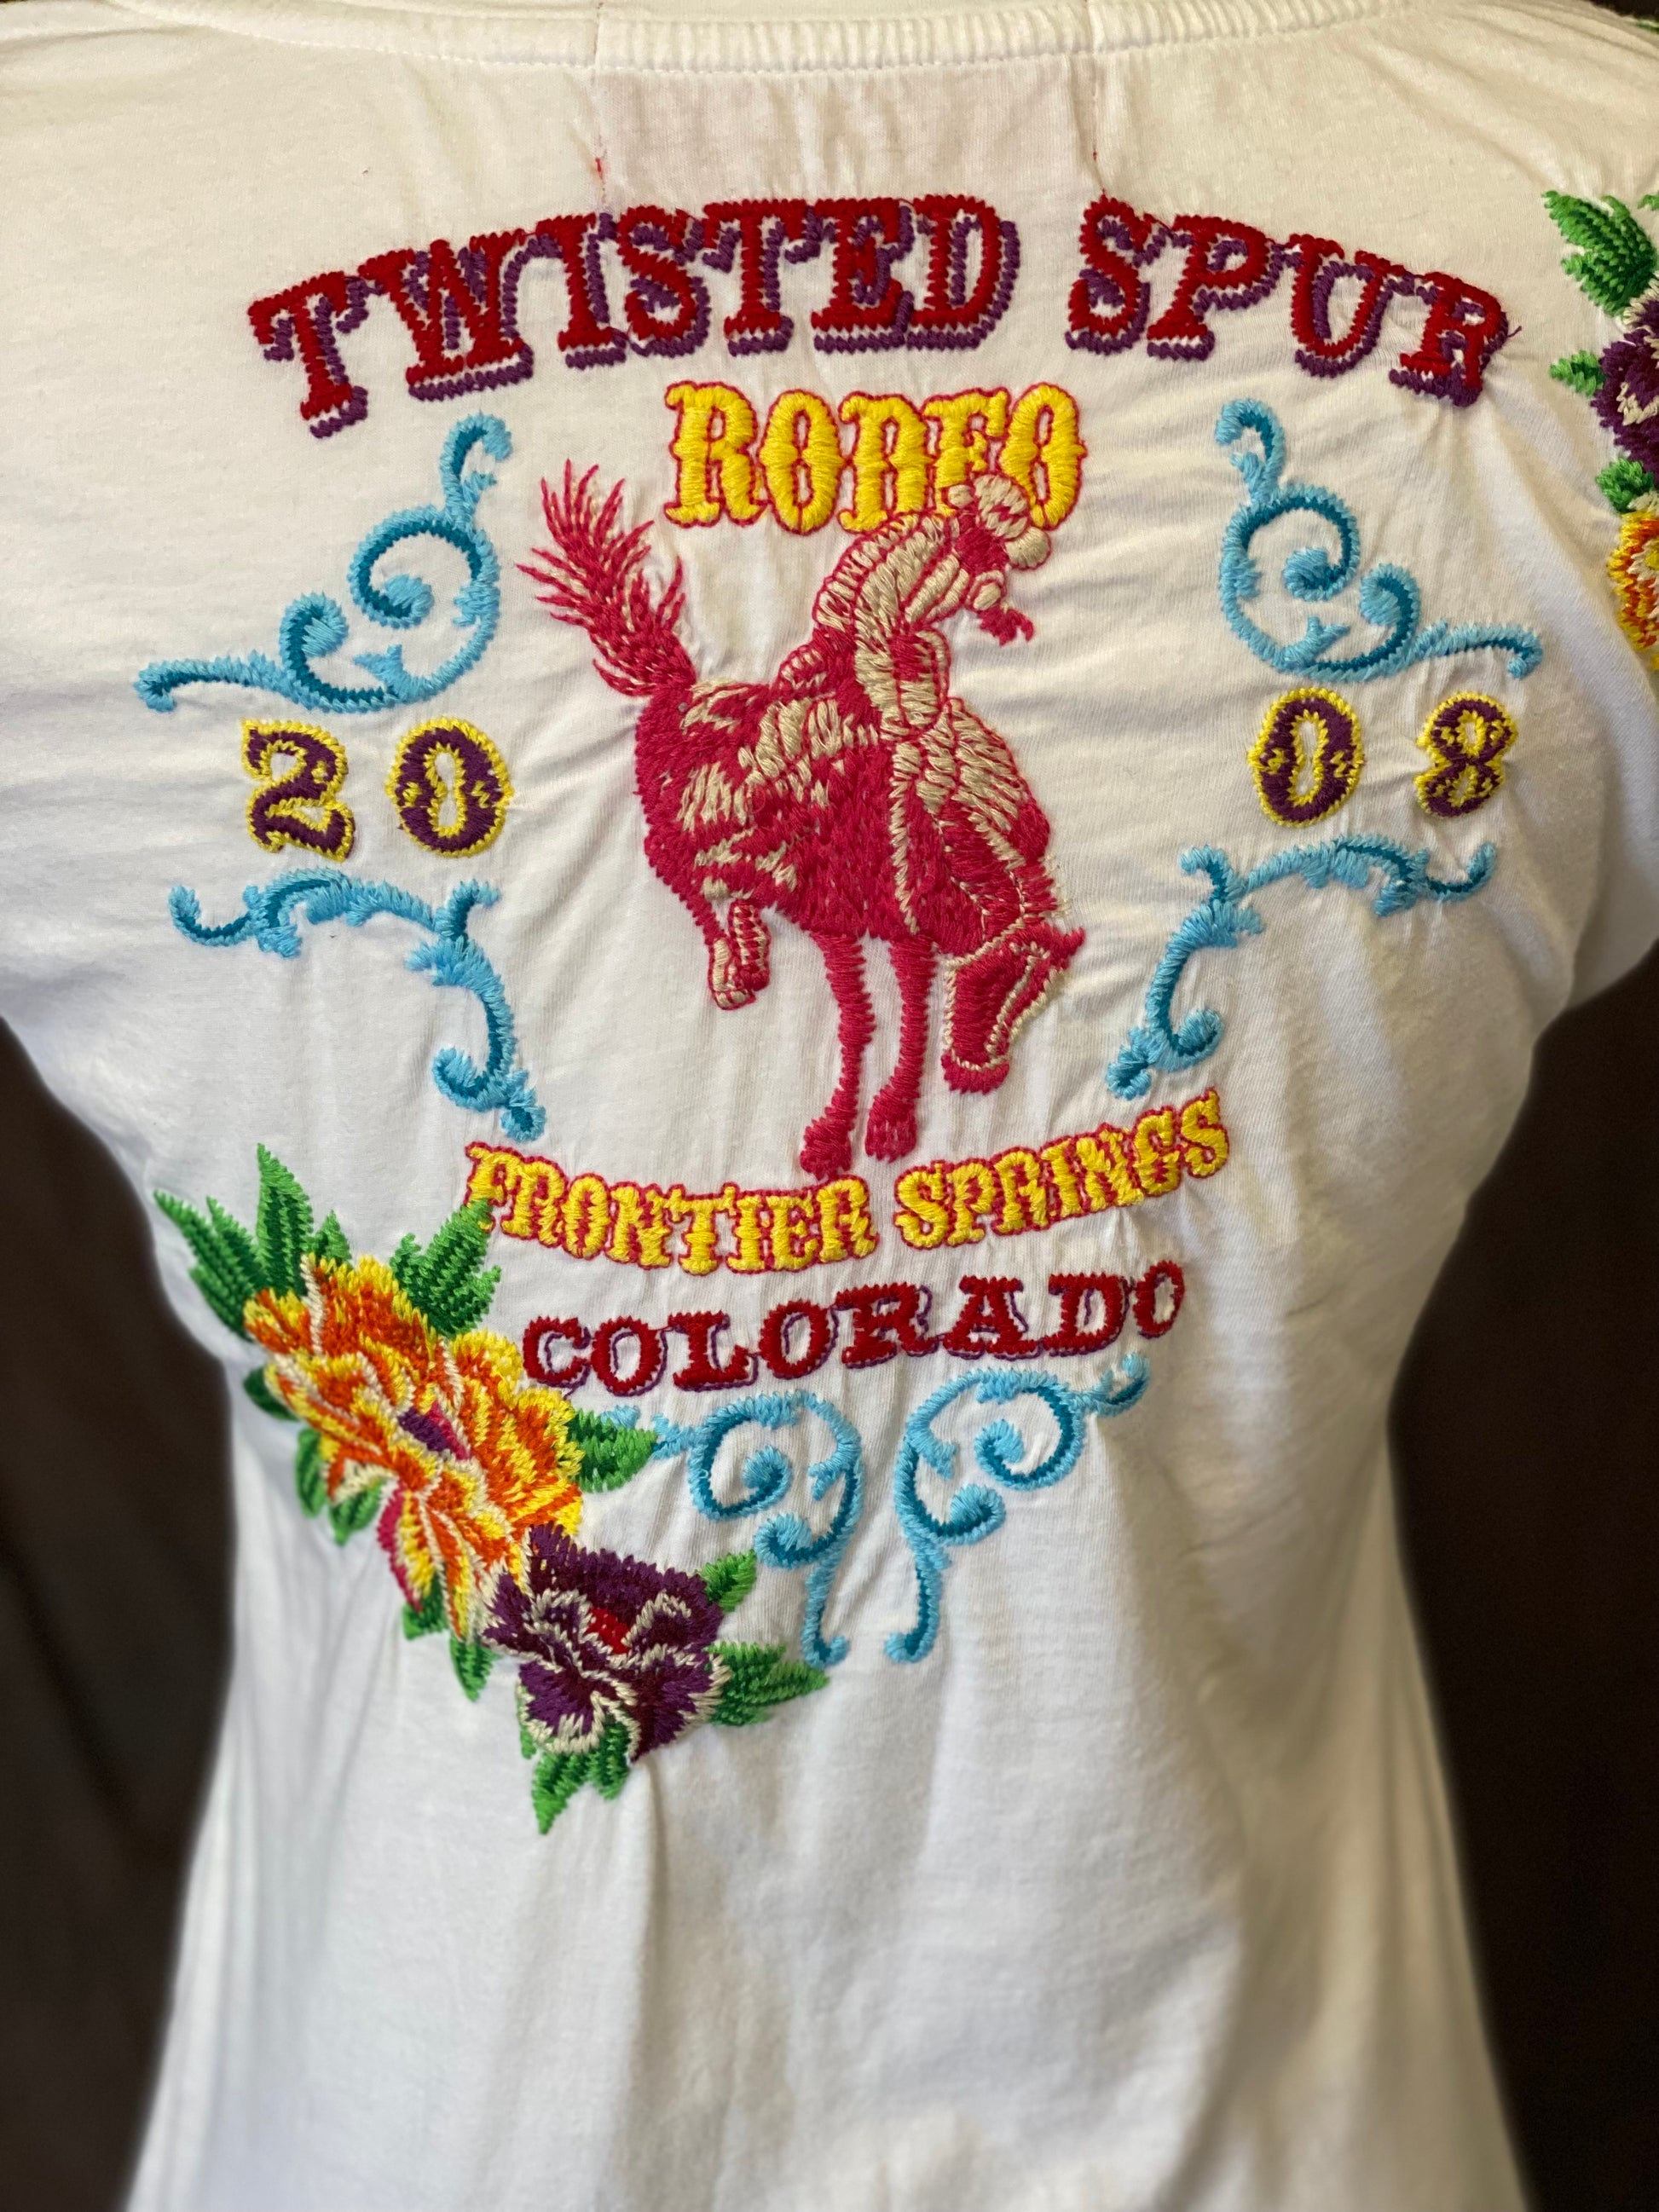 Johnny Was Twisted Spur Rodeo V Neck Tee - Pistol Annie's Boutique